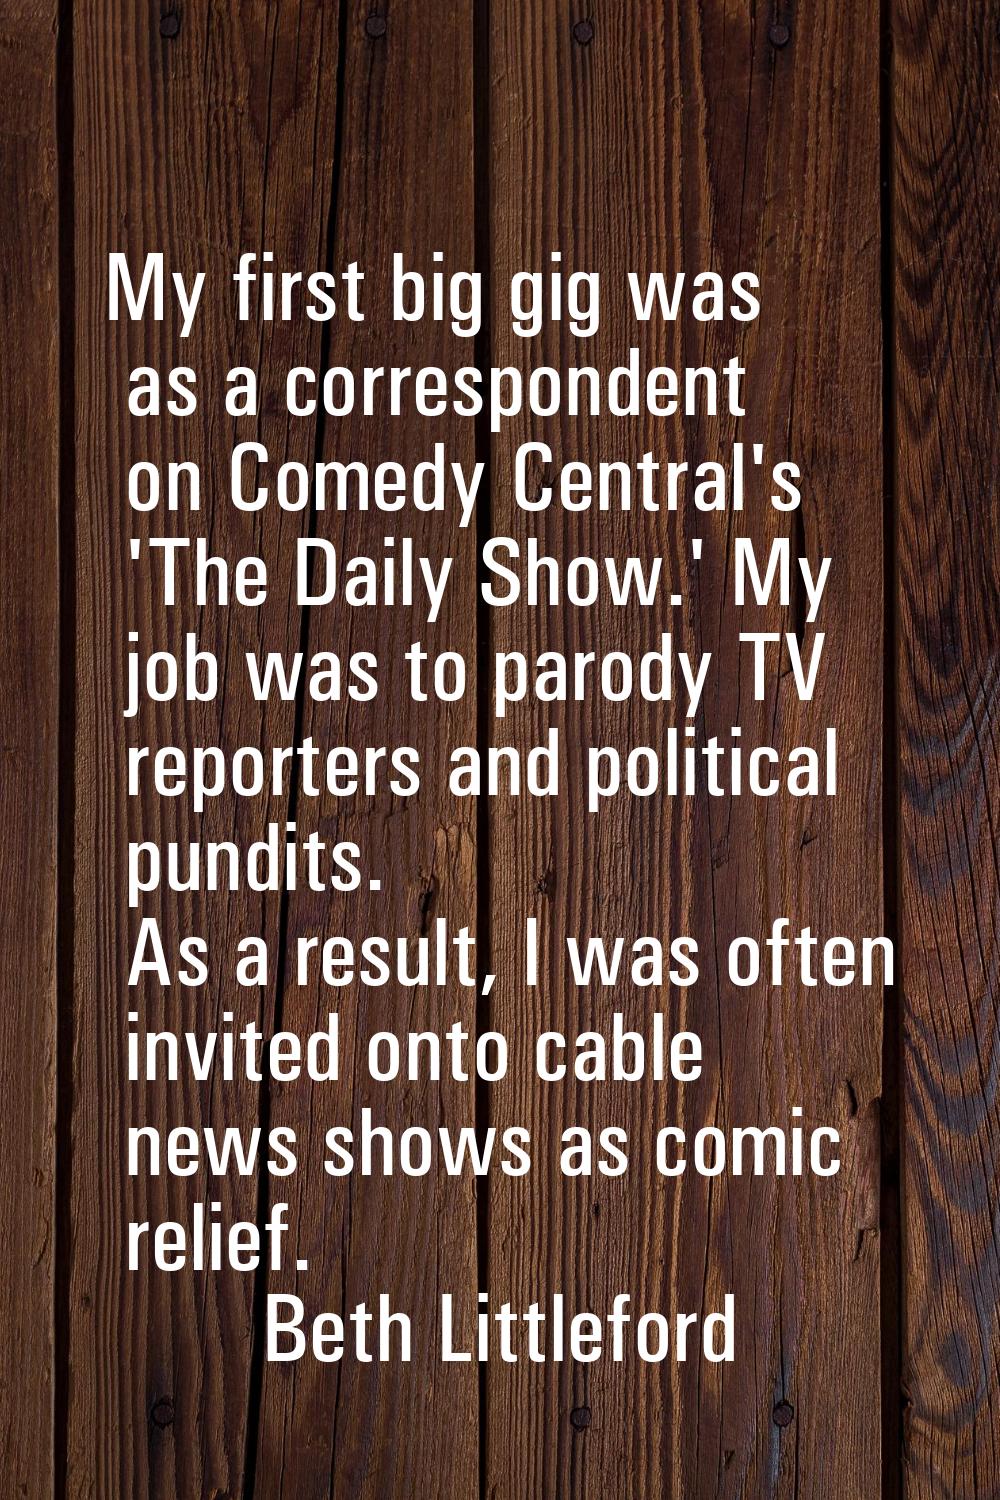 My first big gig was as a correspondent on Comedy Central's 'The Daily Show.' My job was to parody 